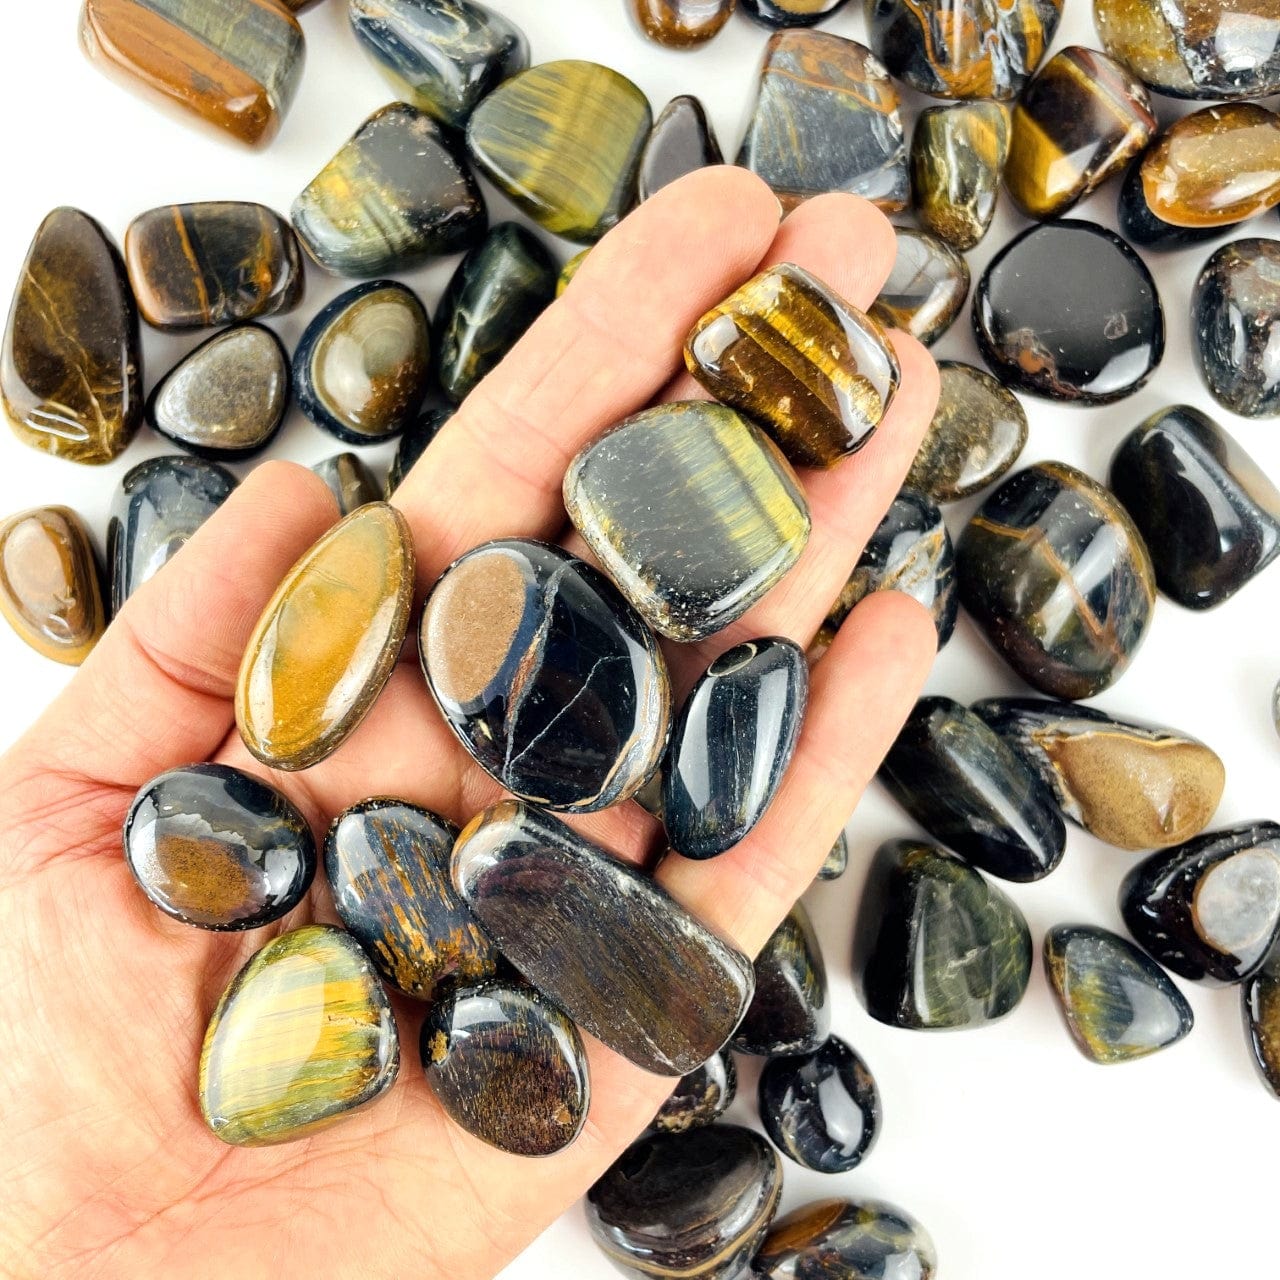 Blue Tigers Eye Polished Stones in a hand for size reference with other stones in background